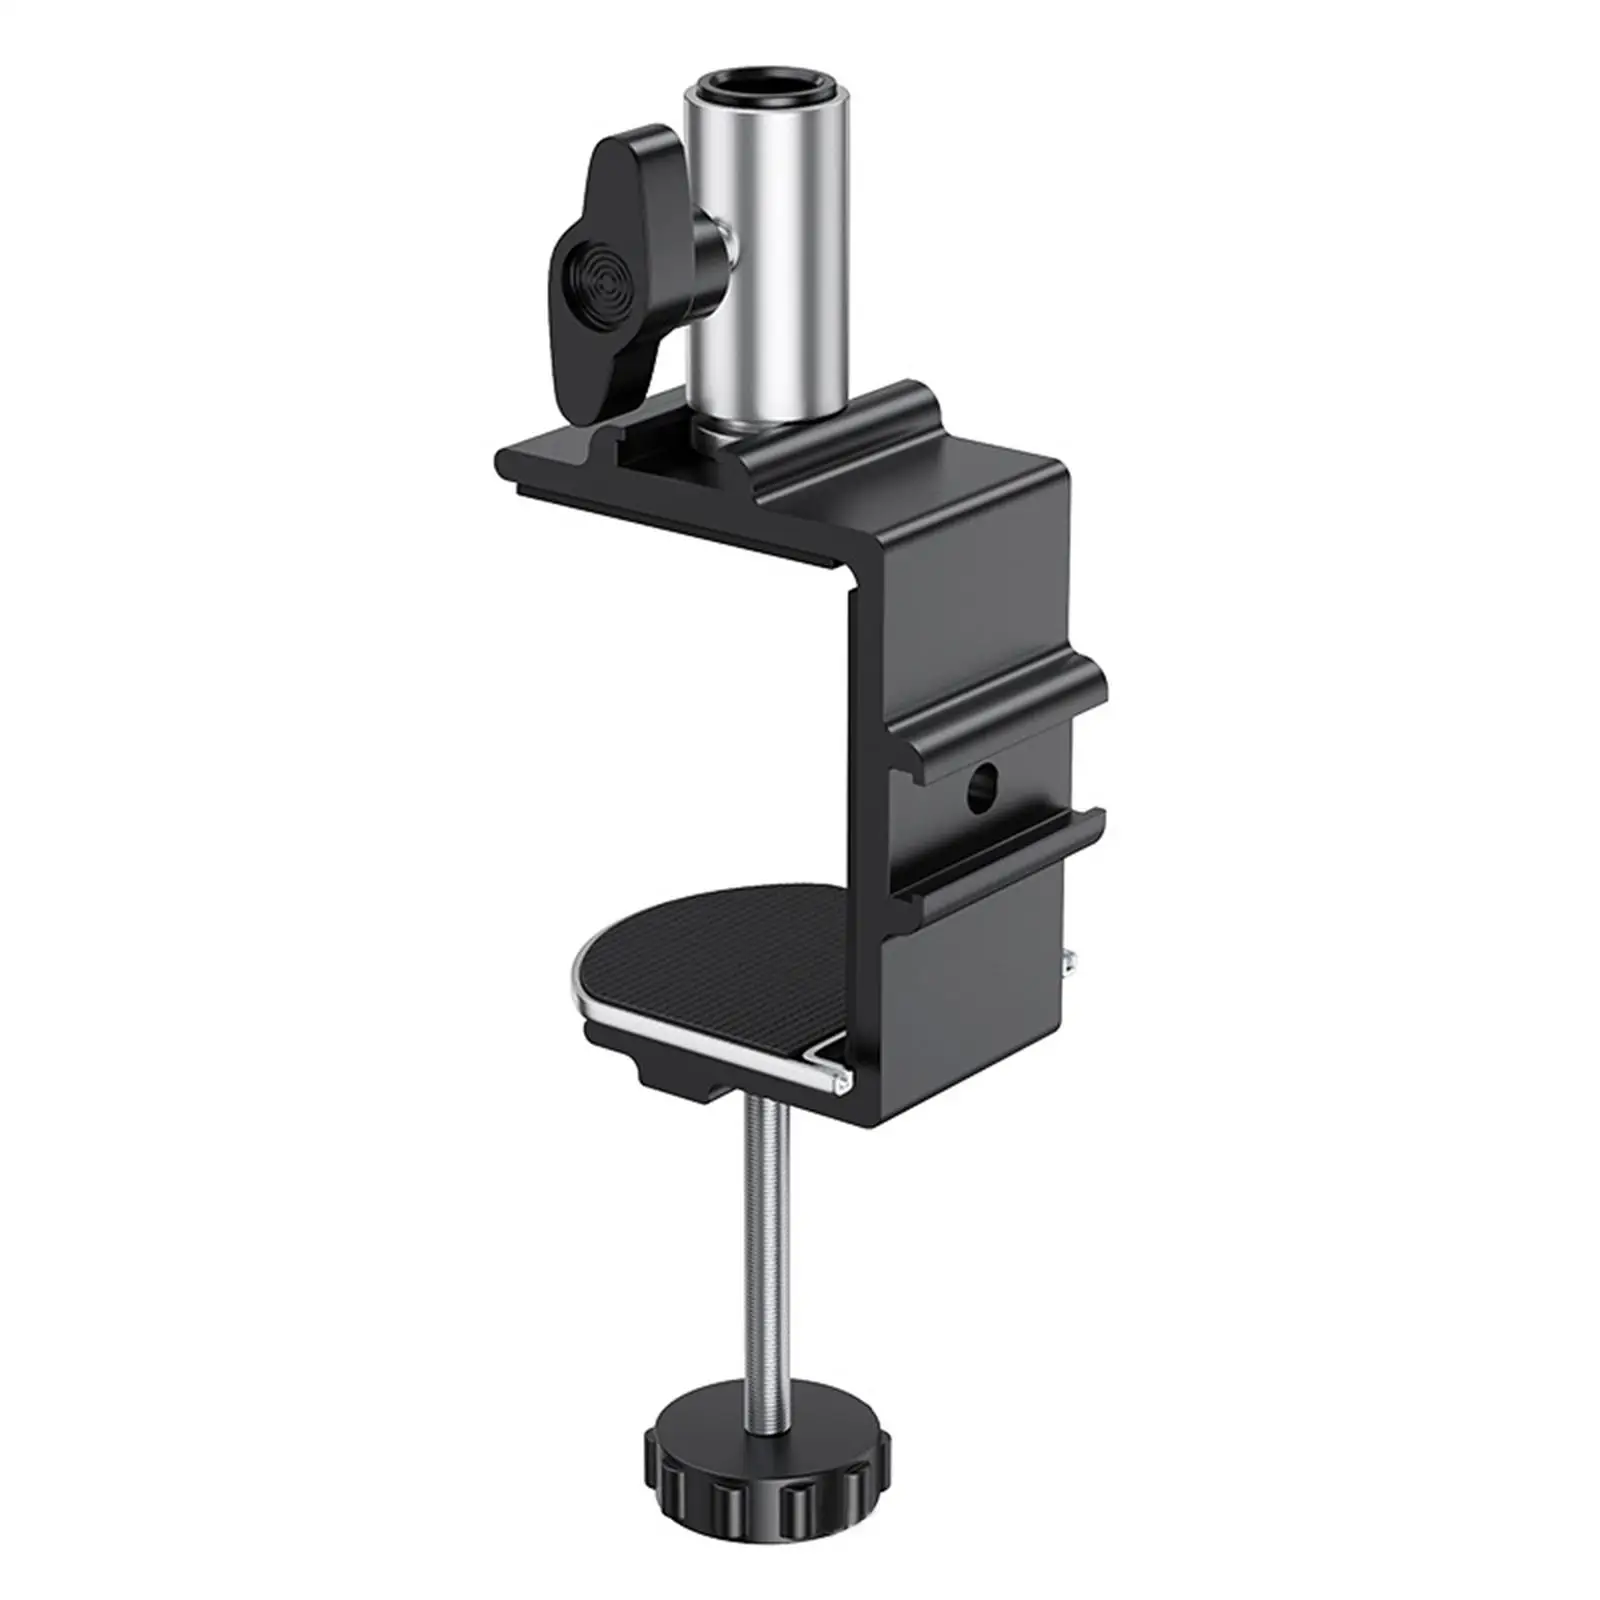 Table Mount Clamp Strong Metal Easy to Clip C Shape Arm Table Mounting Holder Stand for Recording Stand-Working Reading Speeches